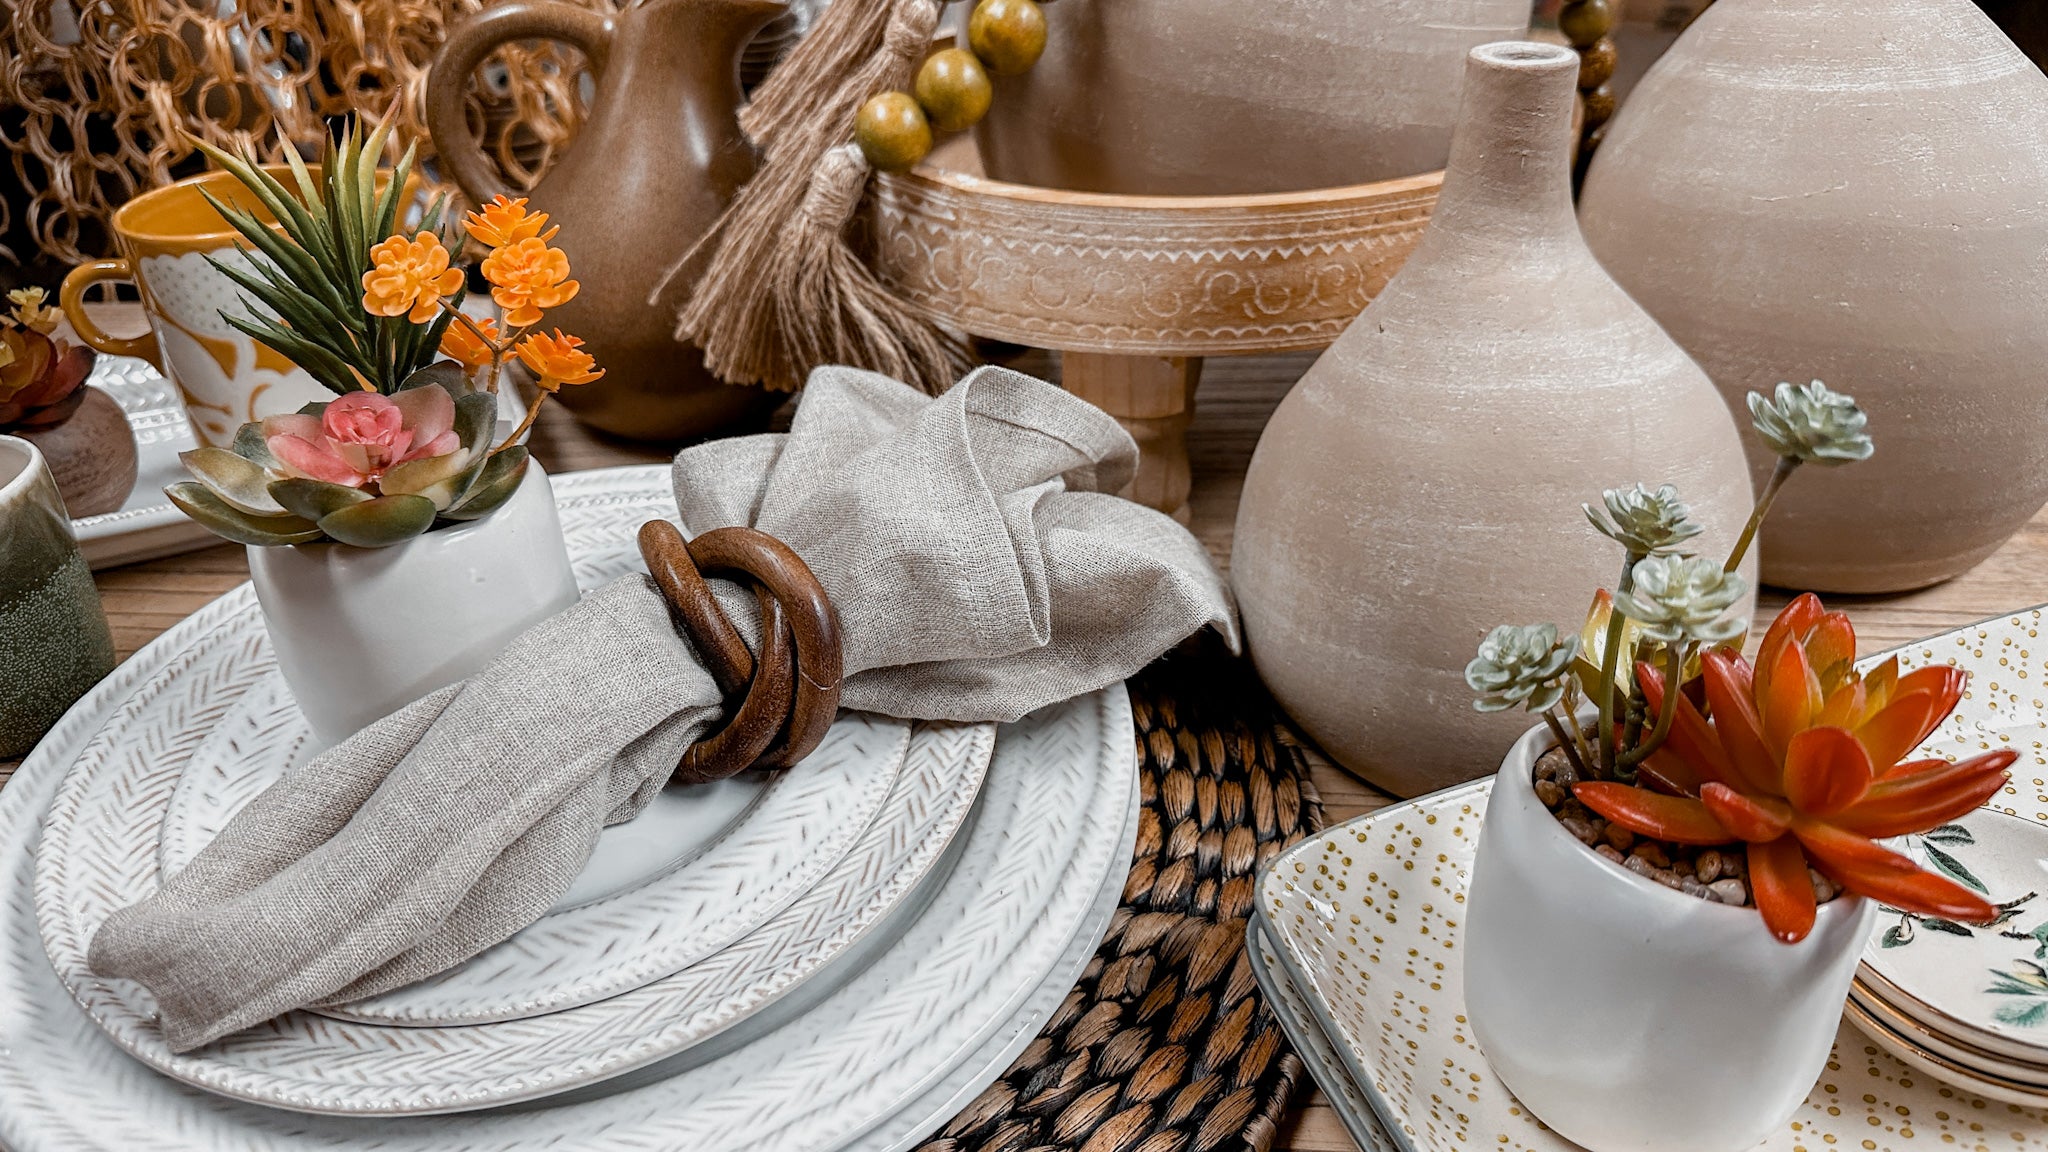 collection of dishes and tabletop decor available at the kitchen store. 